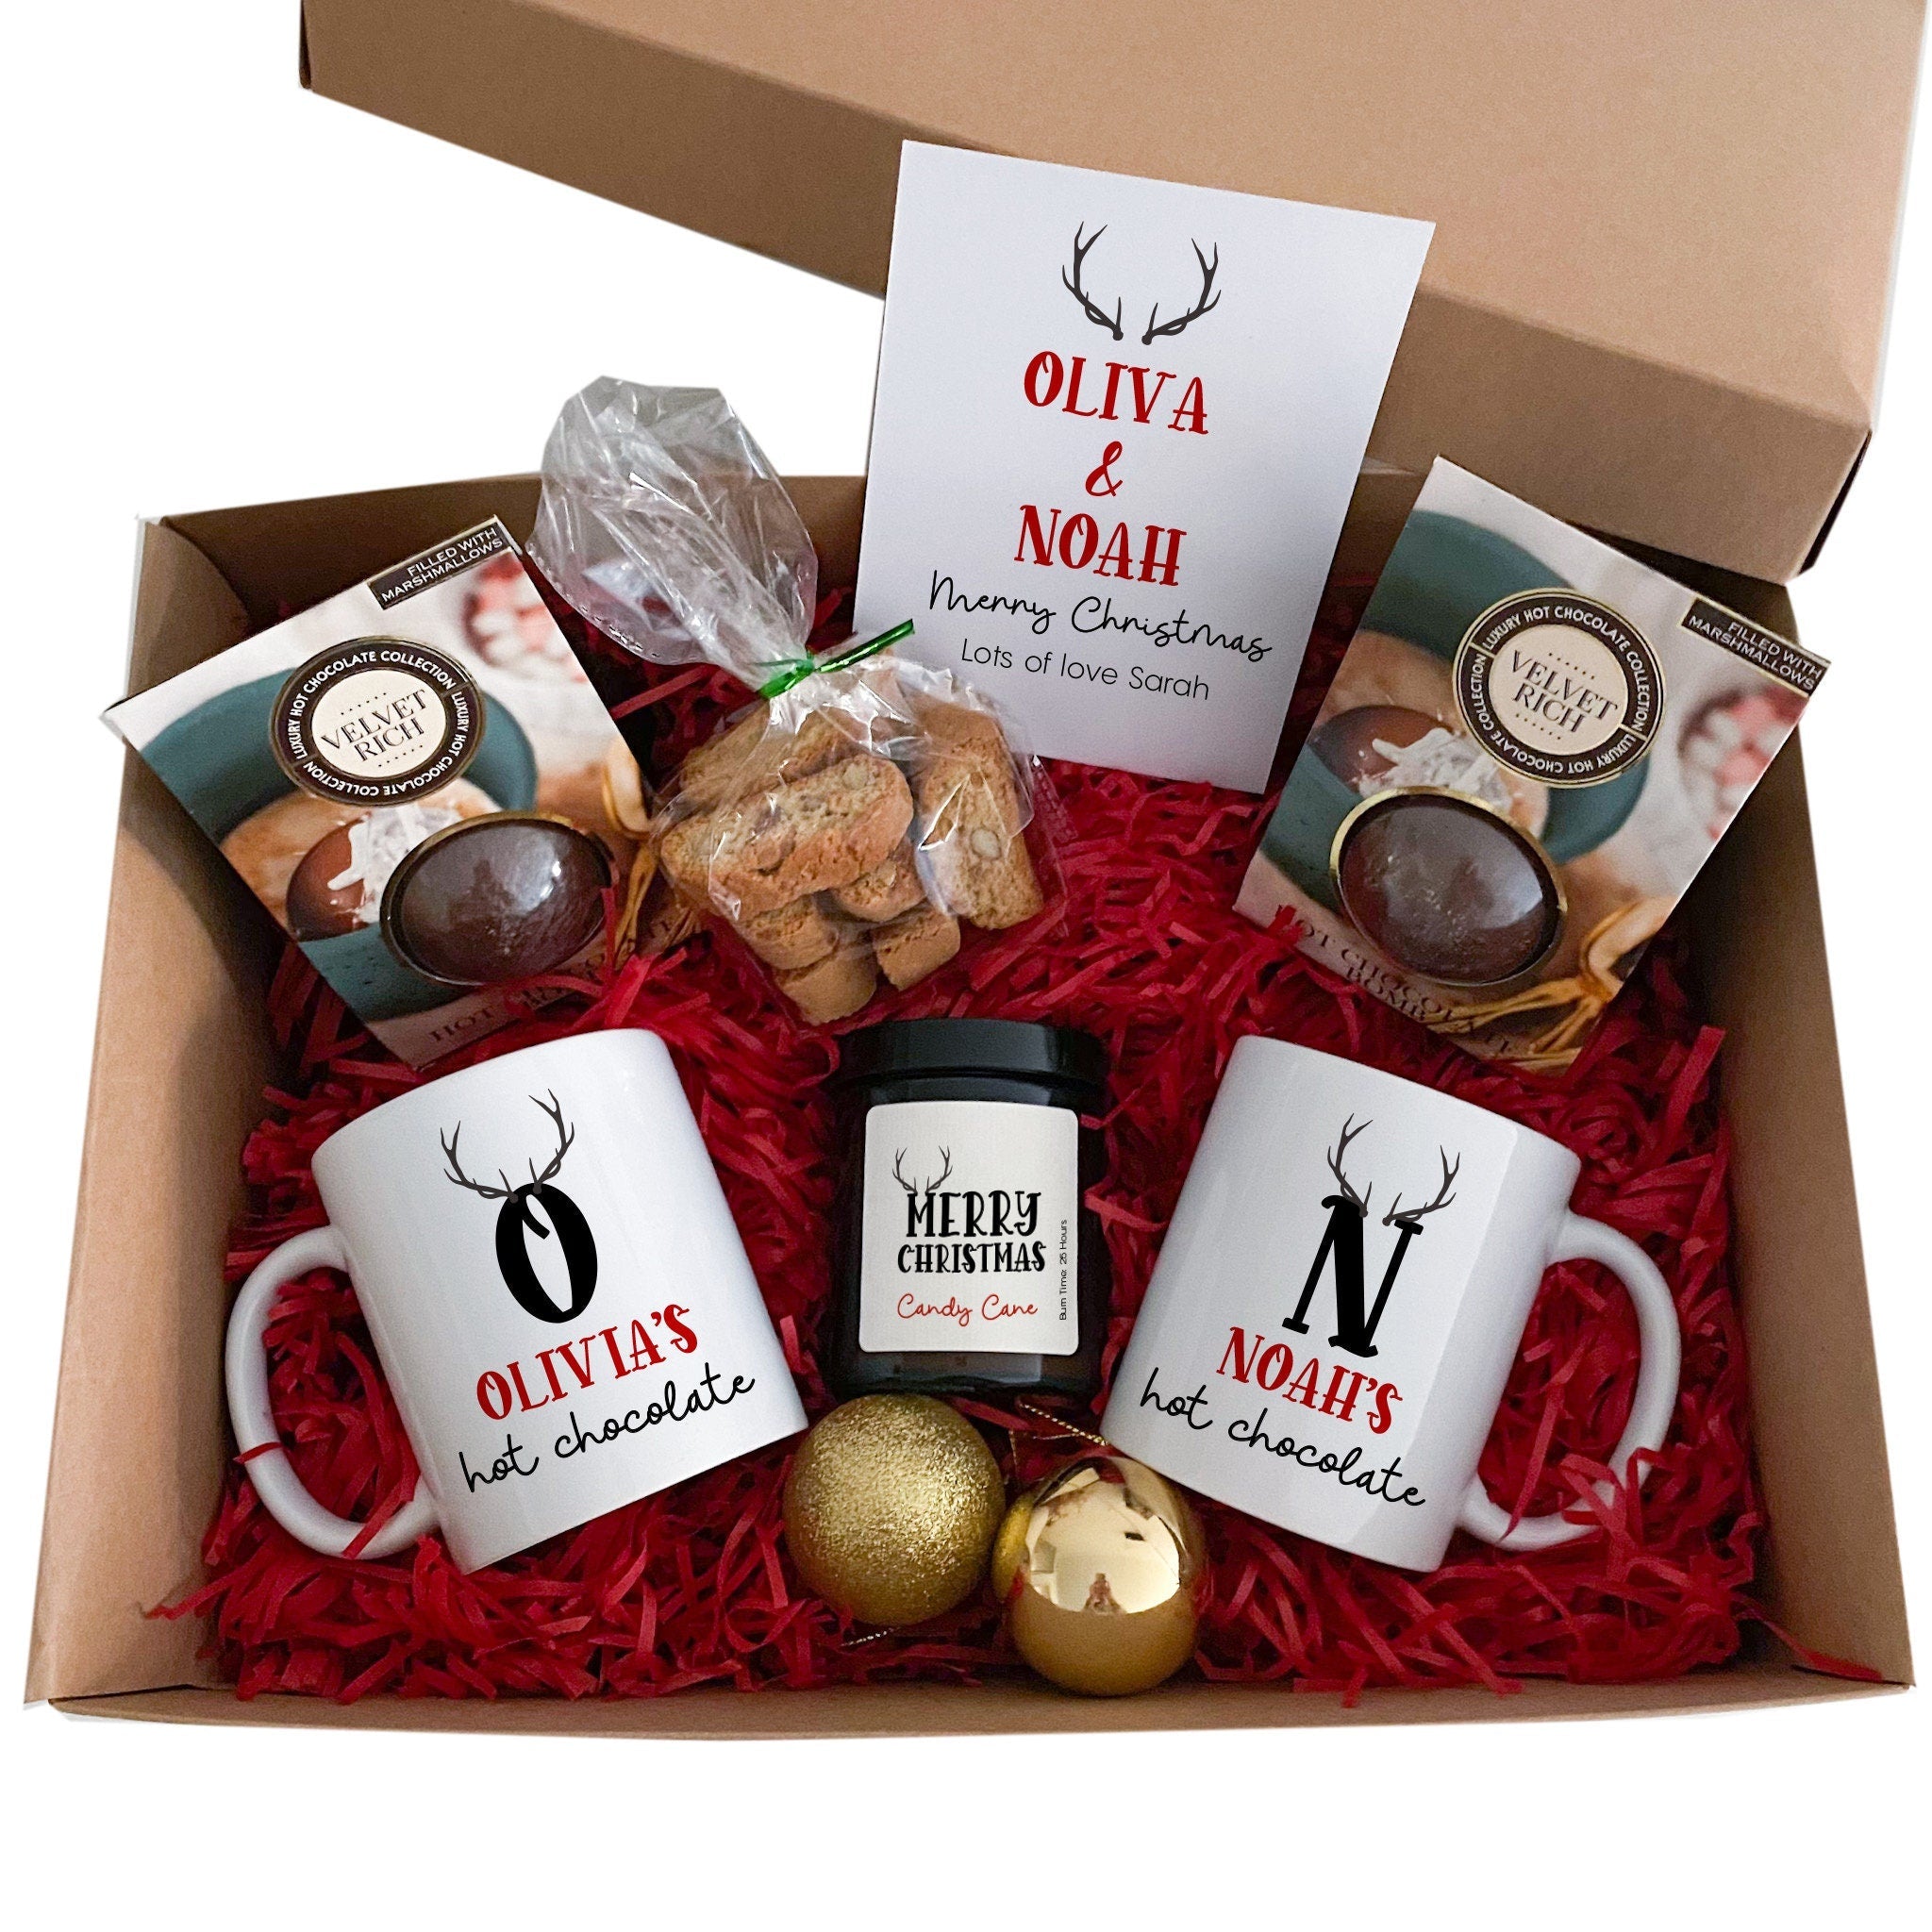 Personalised Hot Chocolate Gift Set for him and her, Mug Candle Biscotti Card, Xmas Box Luxury Hamper